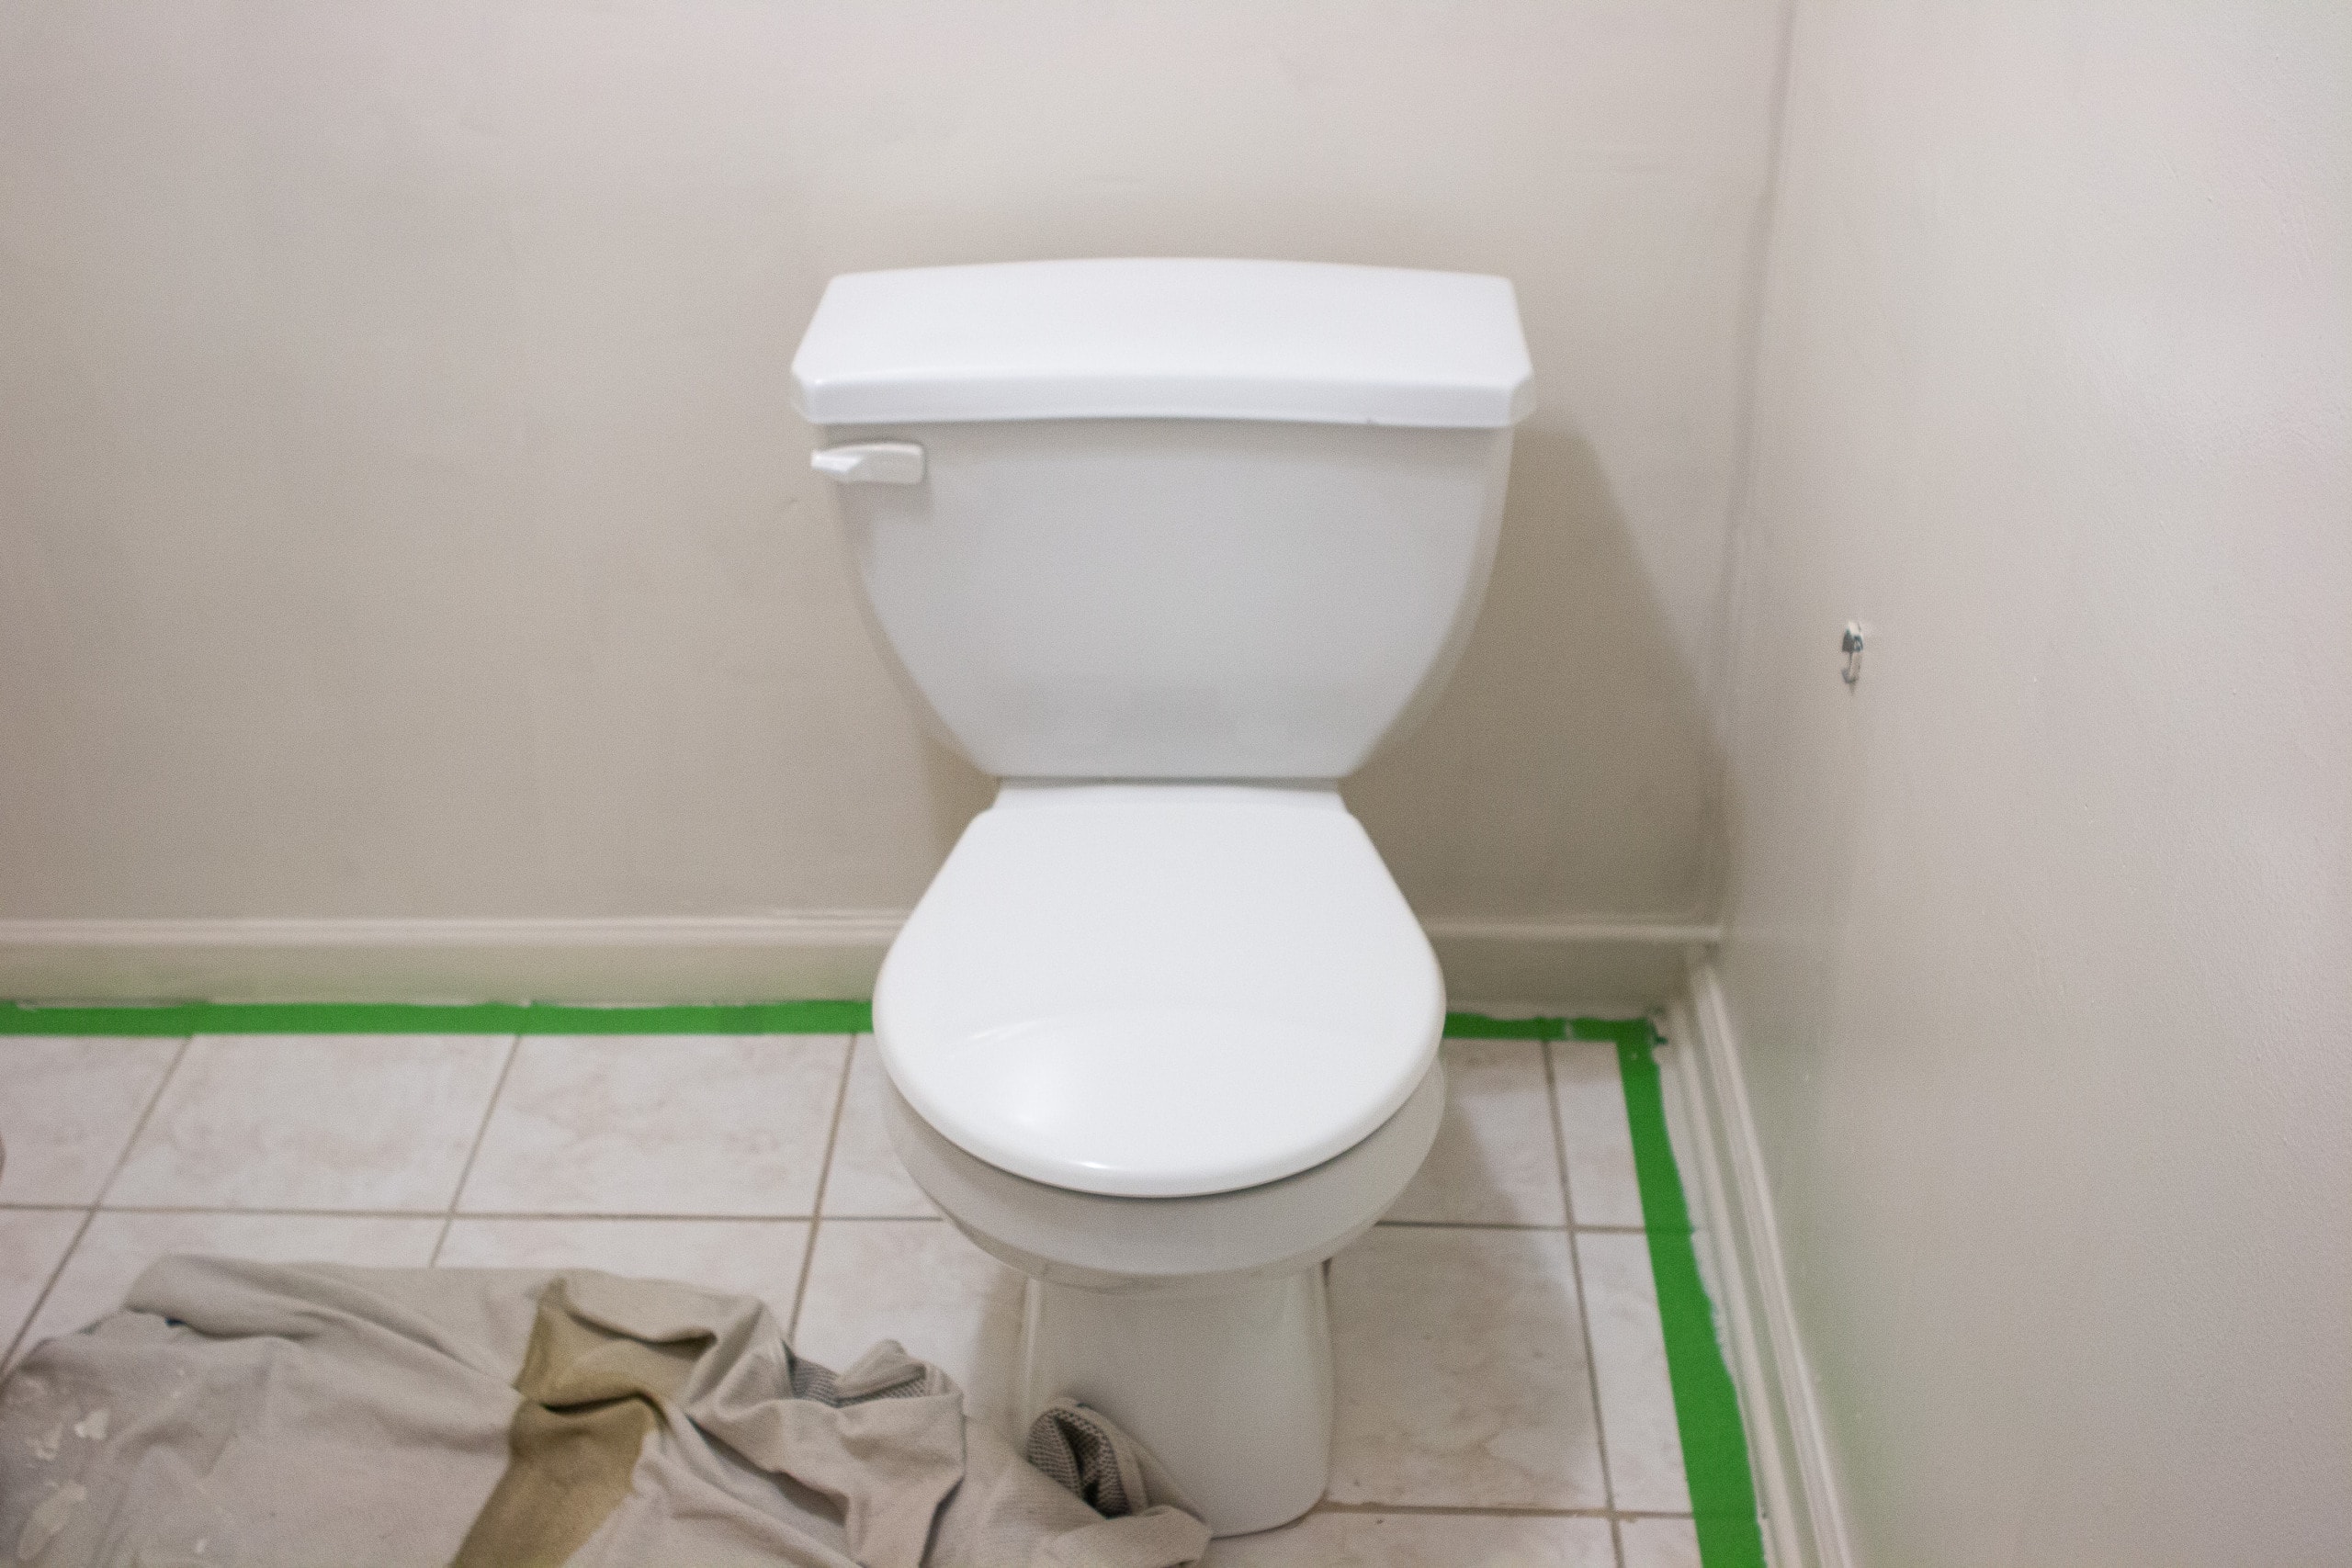 Painting the parts behind the toilet